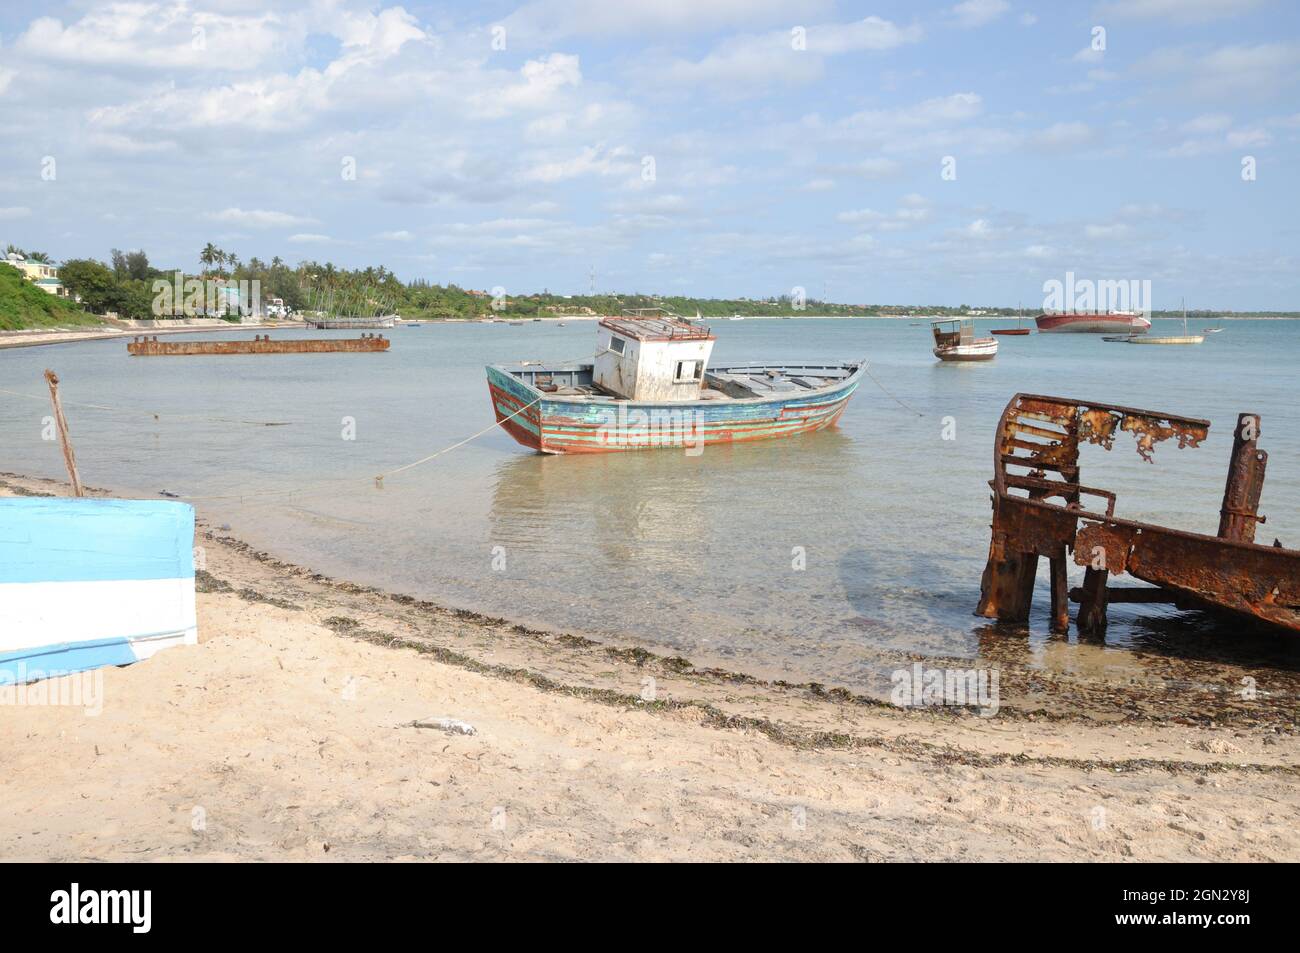 Shipwrecks and ships in poor state of repair, Inhambane Coast, Vilanculos, Mozambique Stock Photo